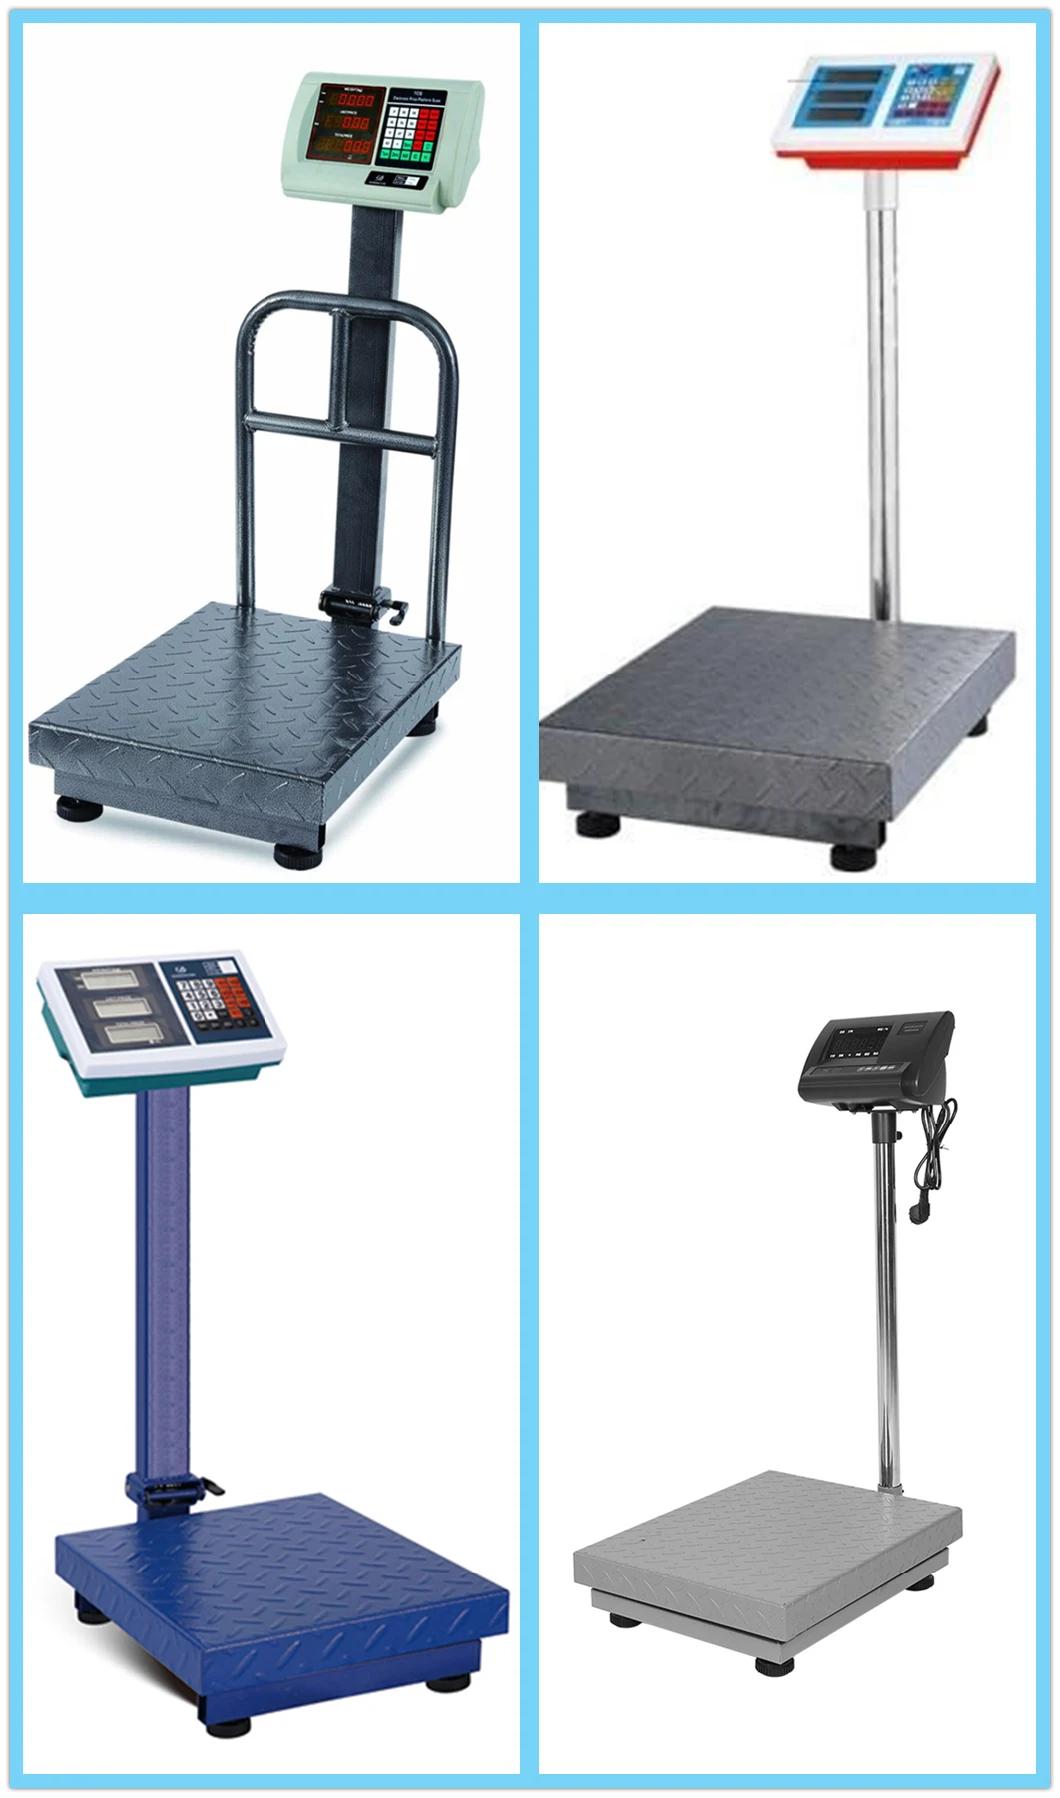 Digital Electronic Platform Scale with LCD Display Thermal Printer Weighing Scales Bench